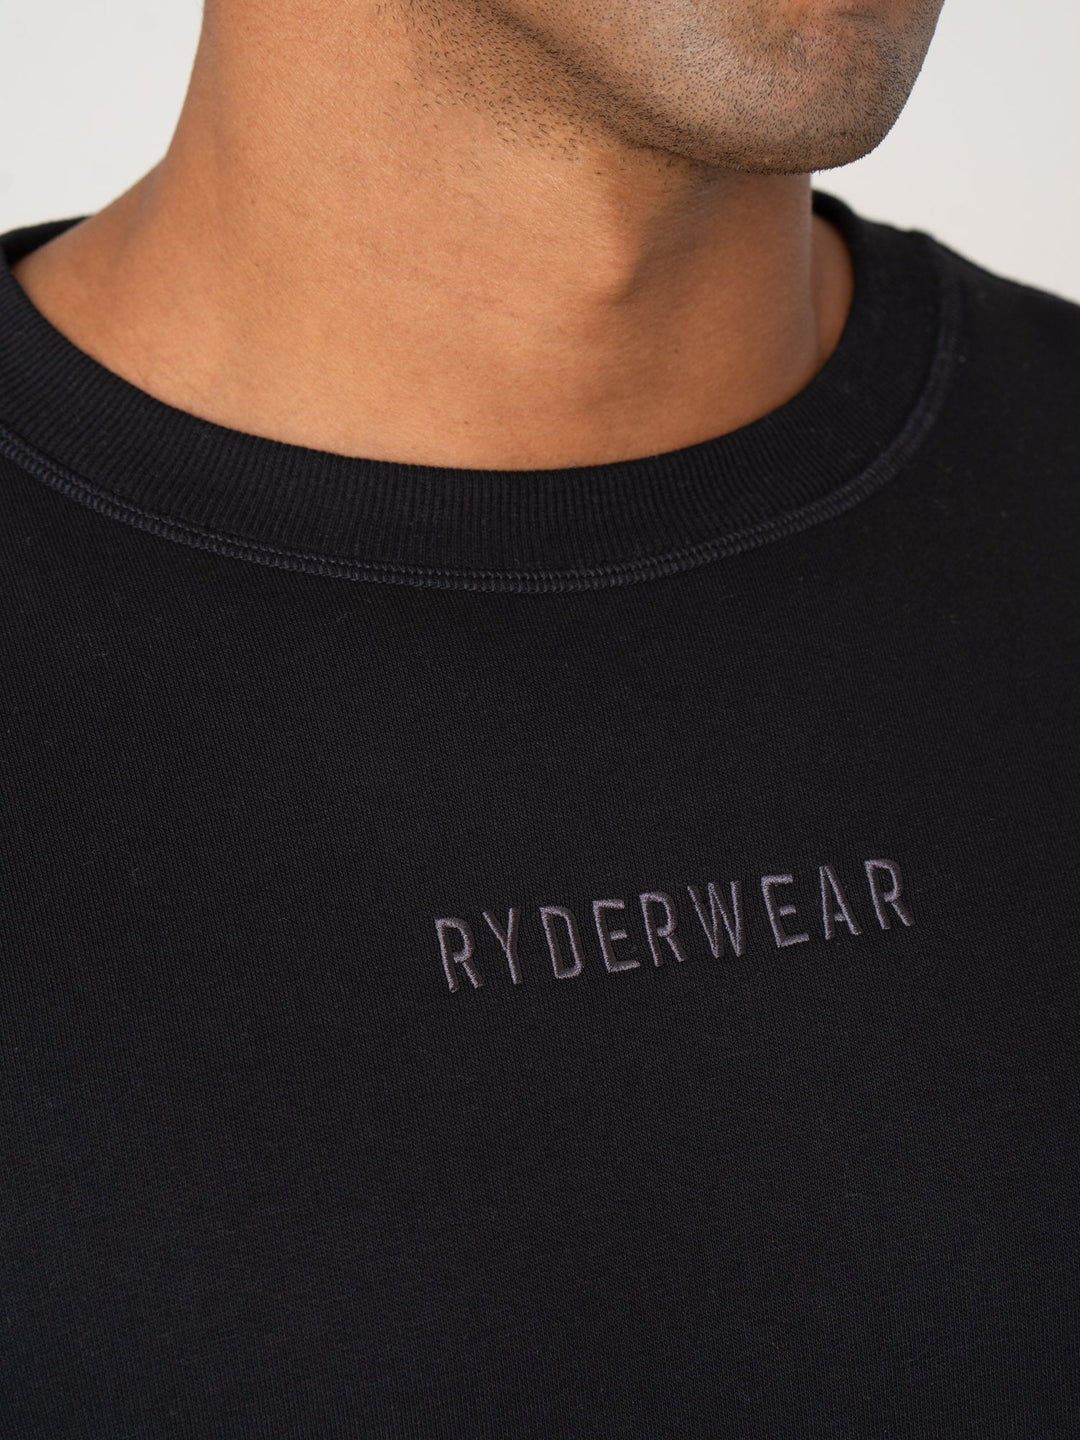 Pursuit Pullover - Black Clothing Ryderwear 